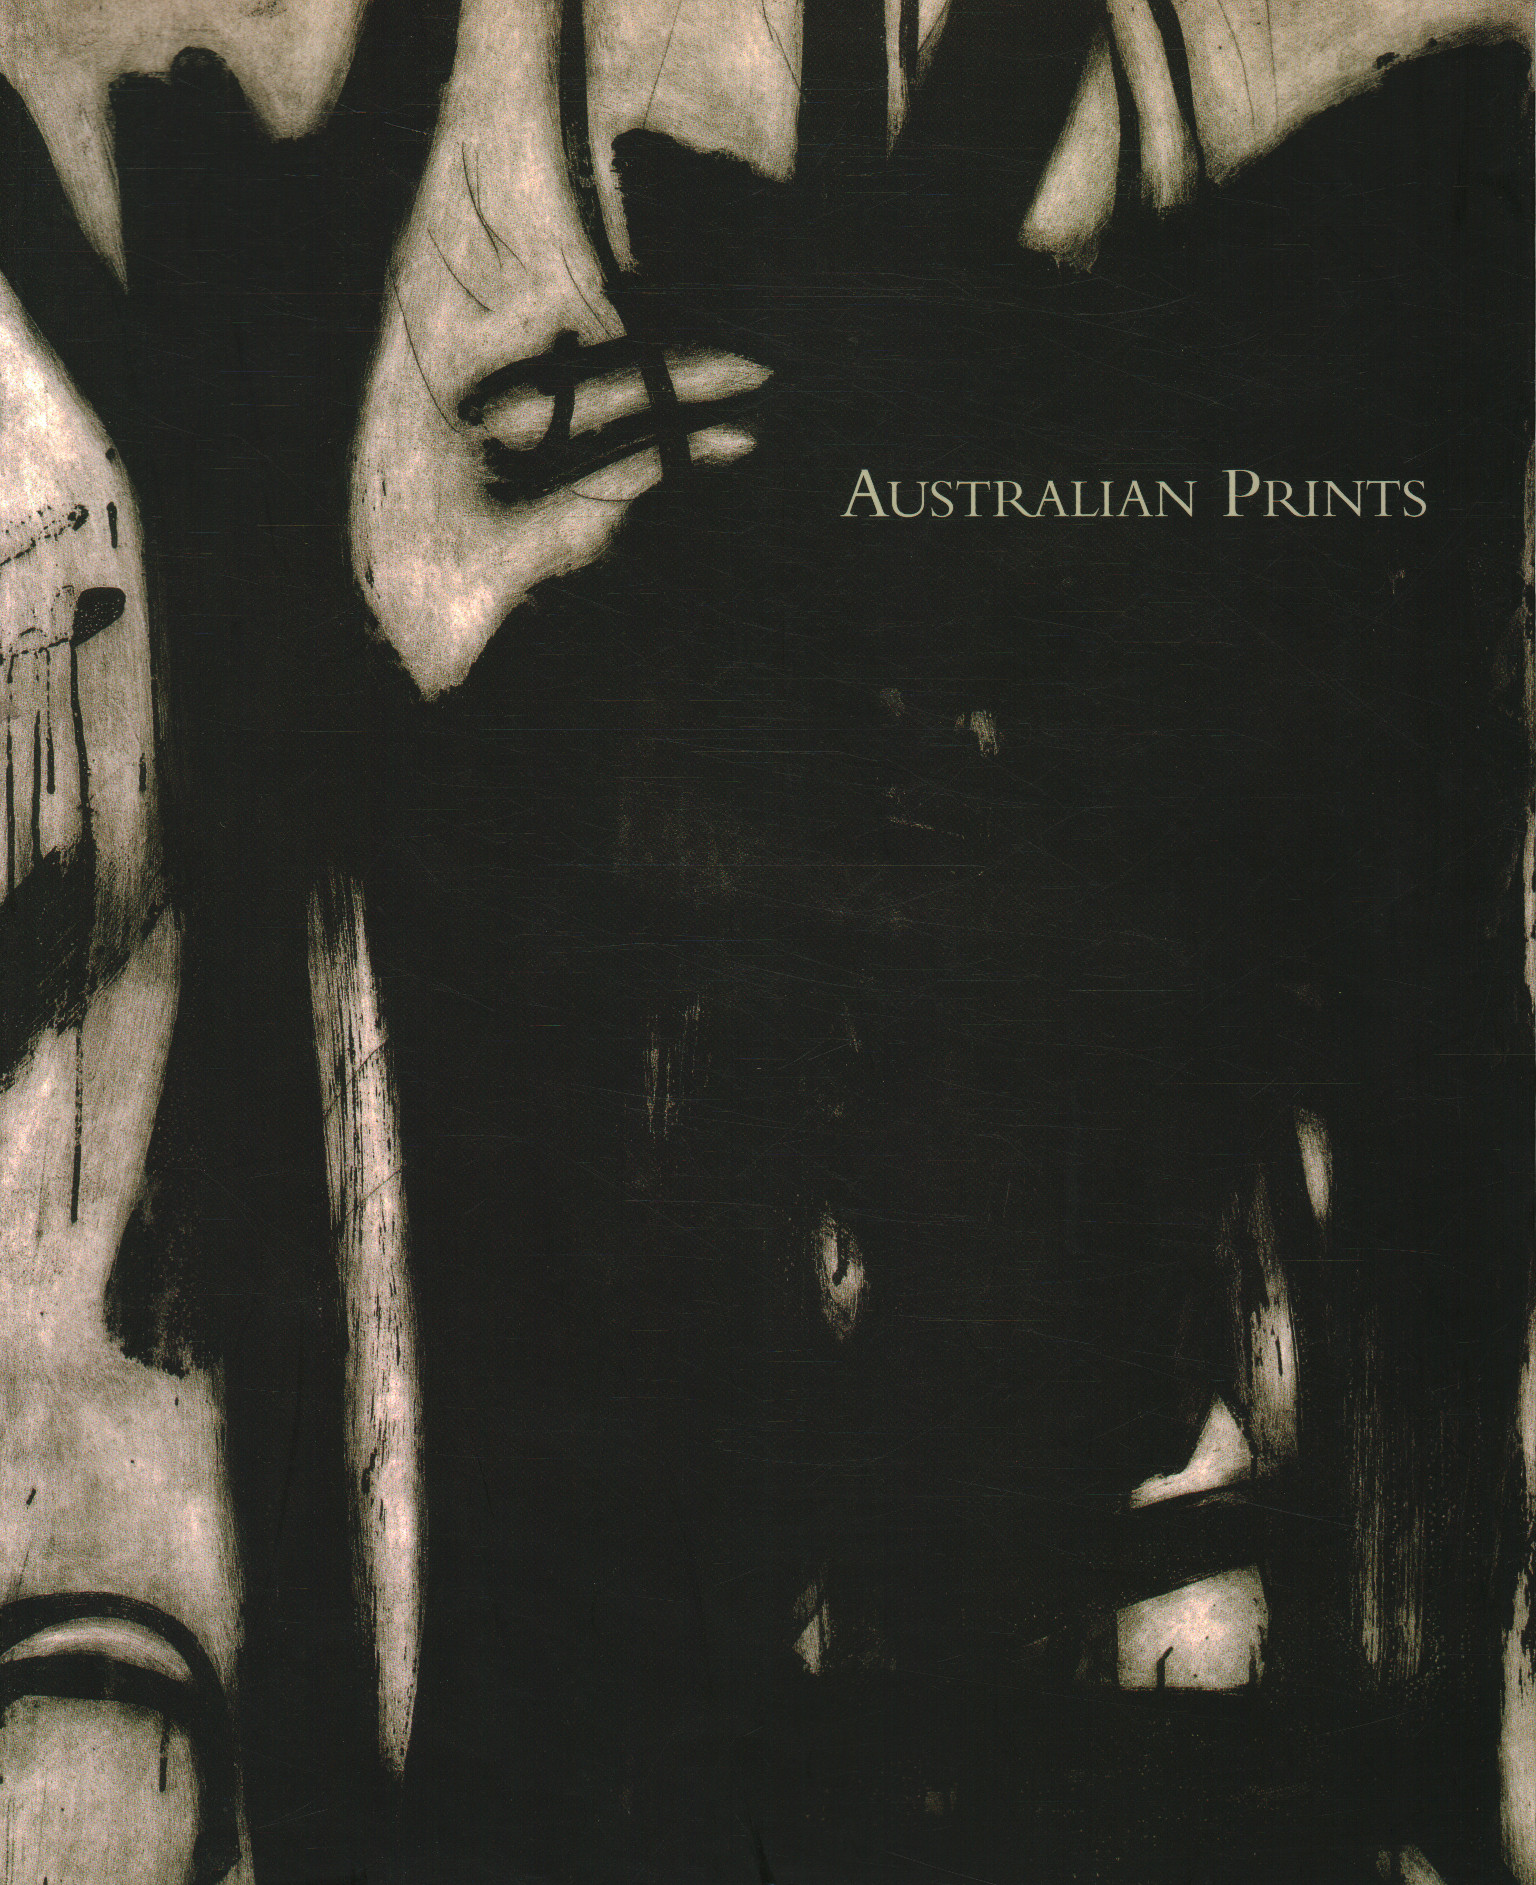 Australian Prints from the Gallery0apostro